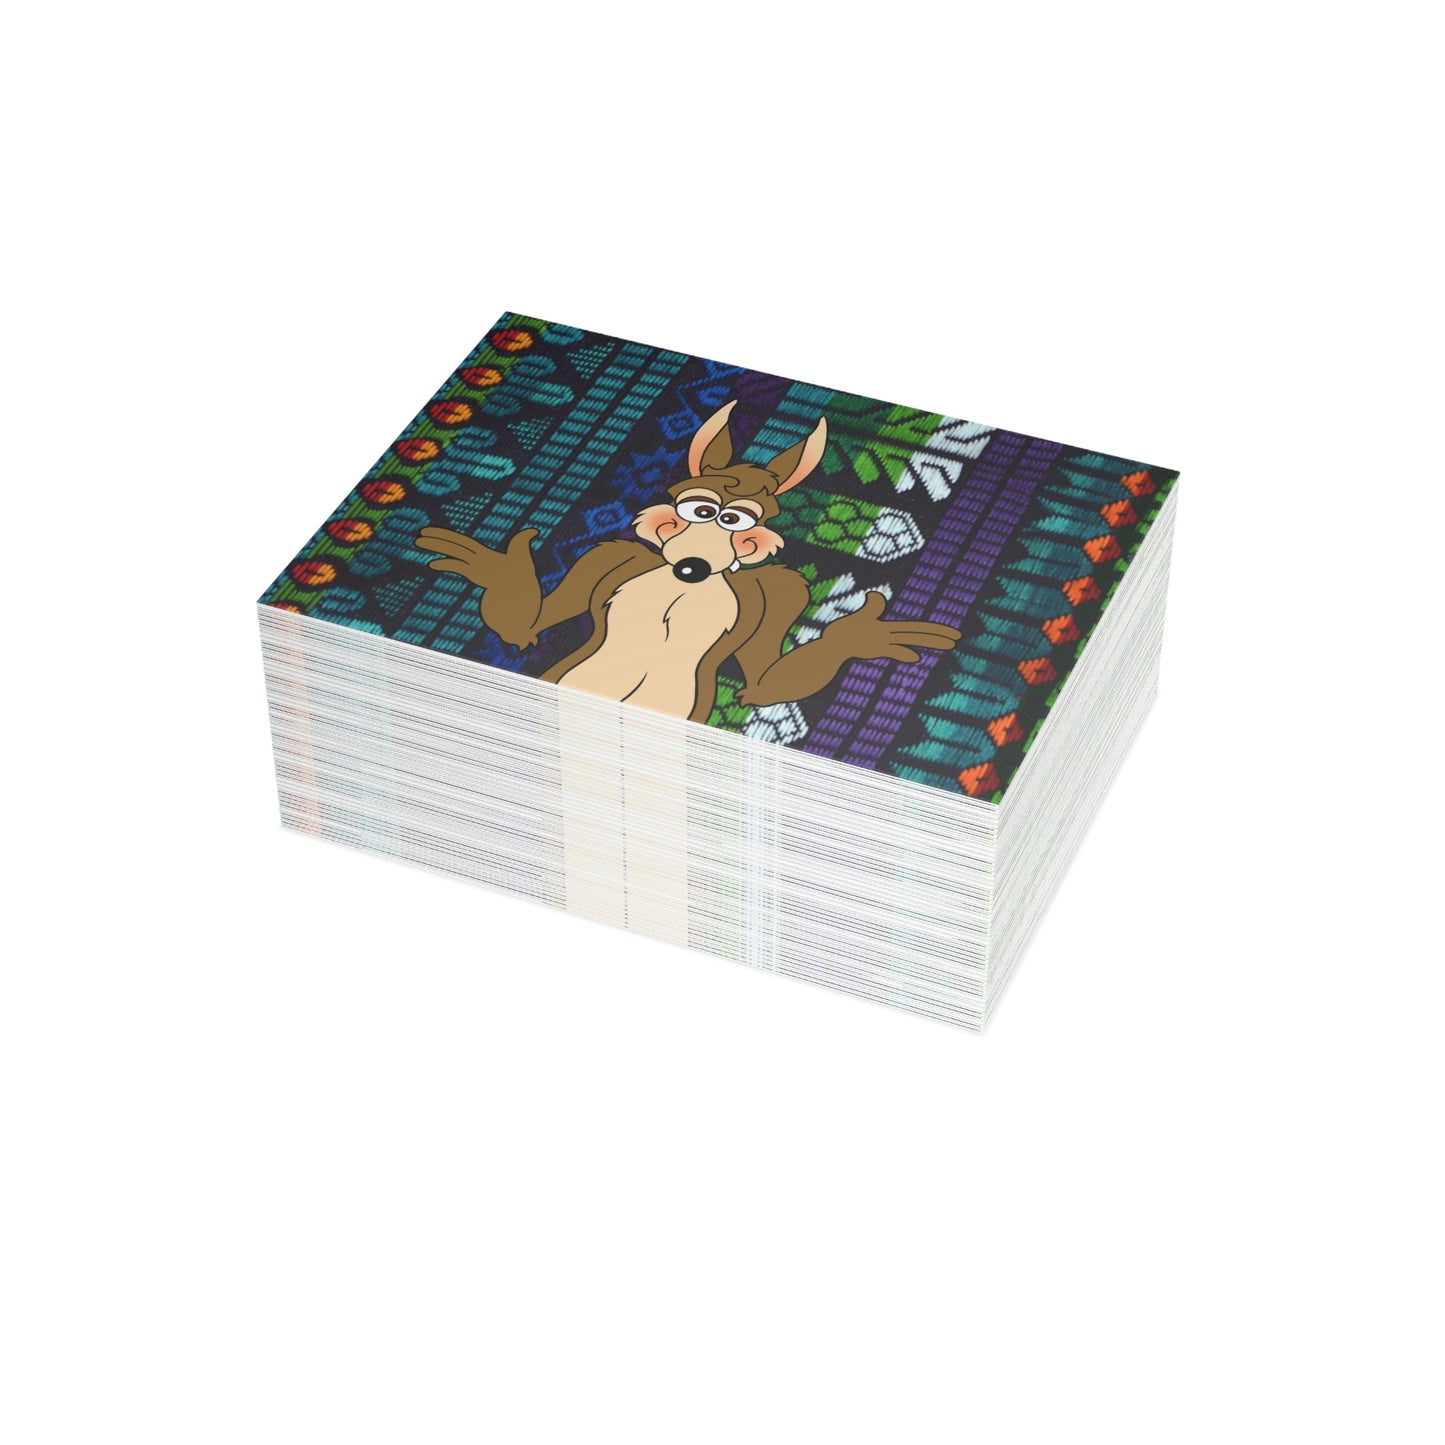 A Pack of Lies Greeting Card Bundles (envelopes not included)